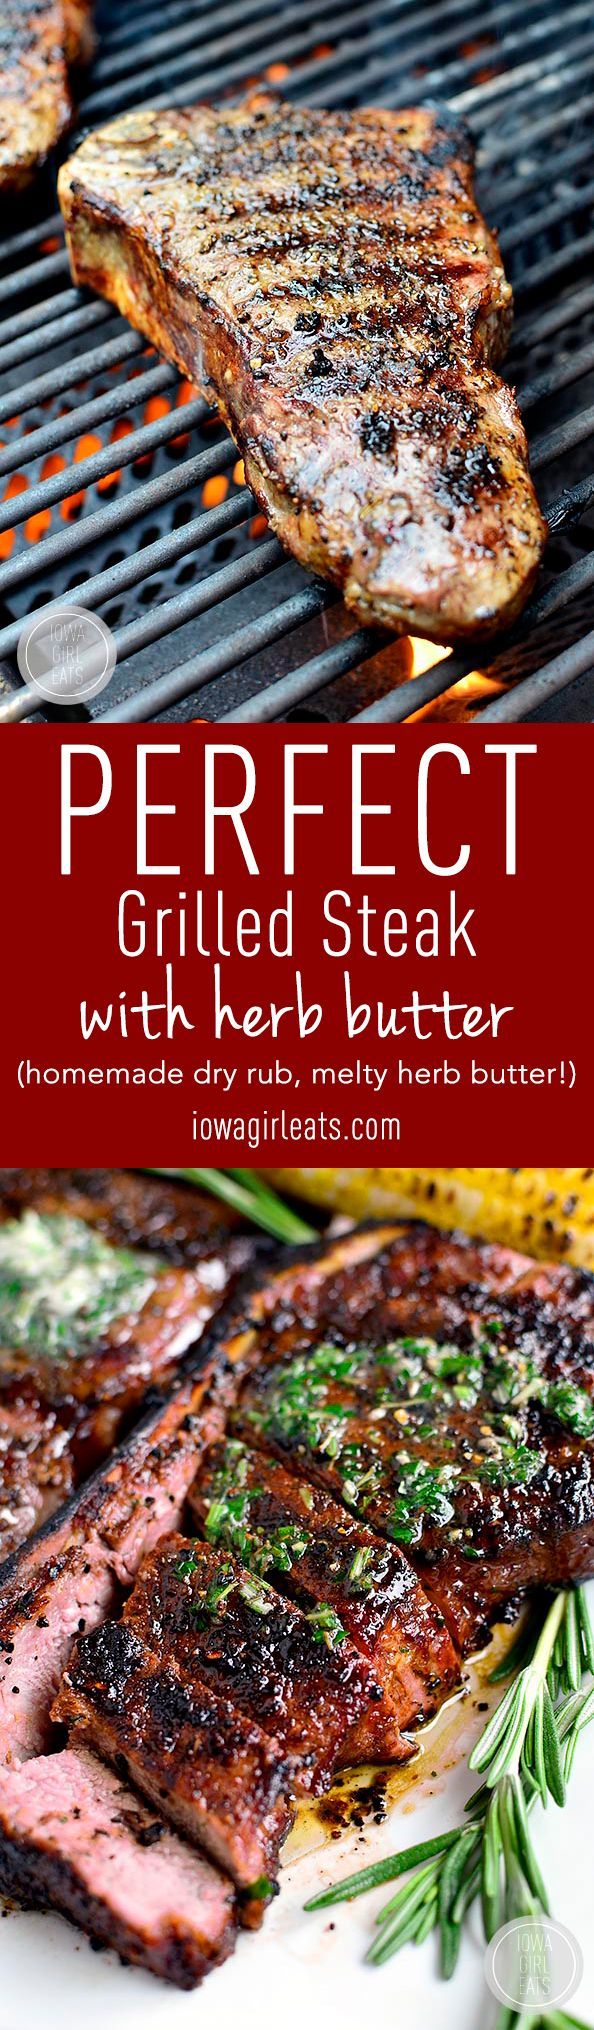 Perfect Grilled Steak – Juicy and Sizzling! | Recipe | Recipes, Grilling recipes, Bbq recipes